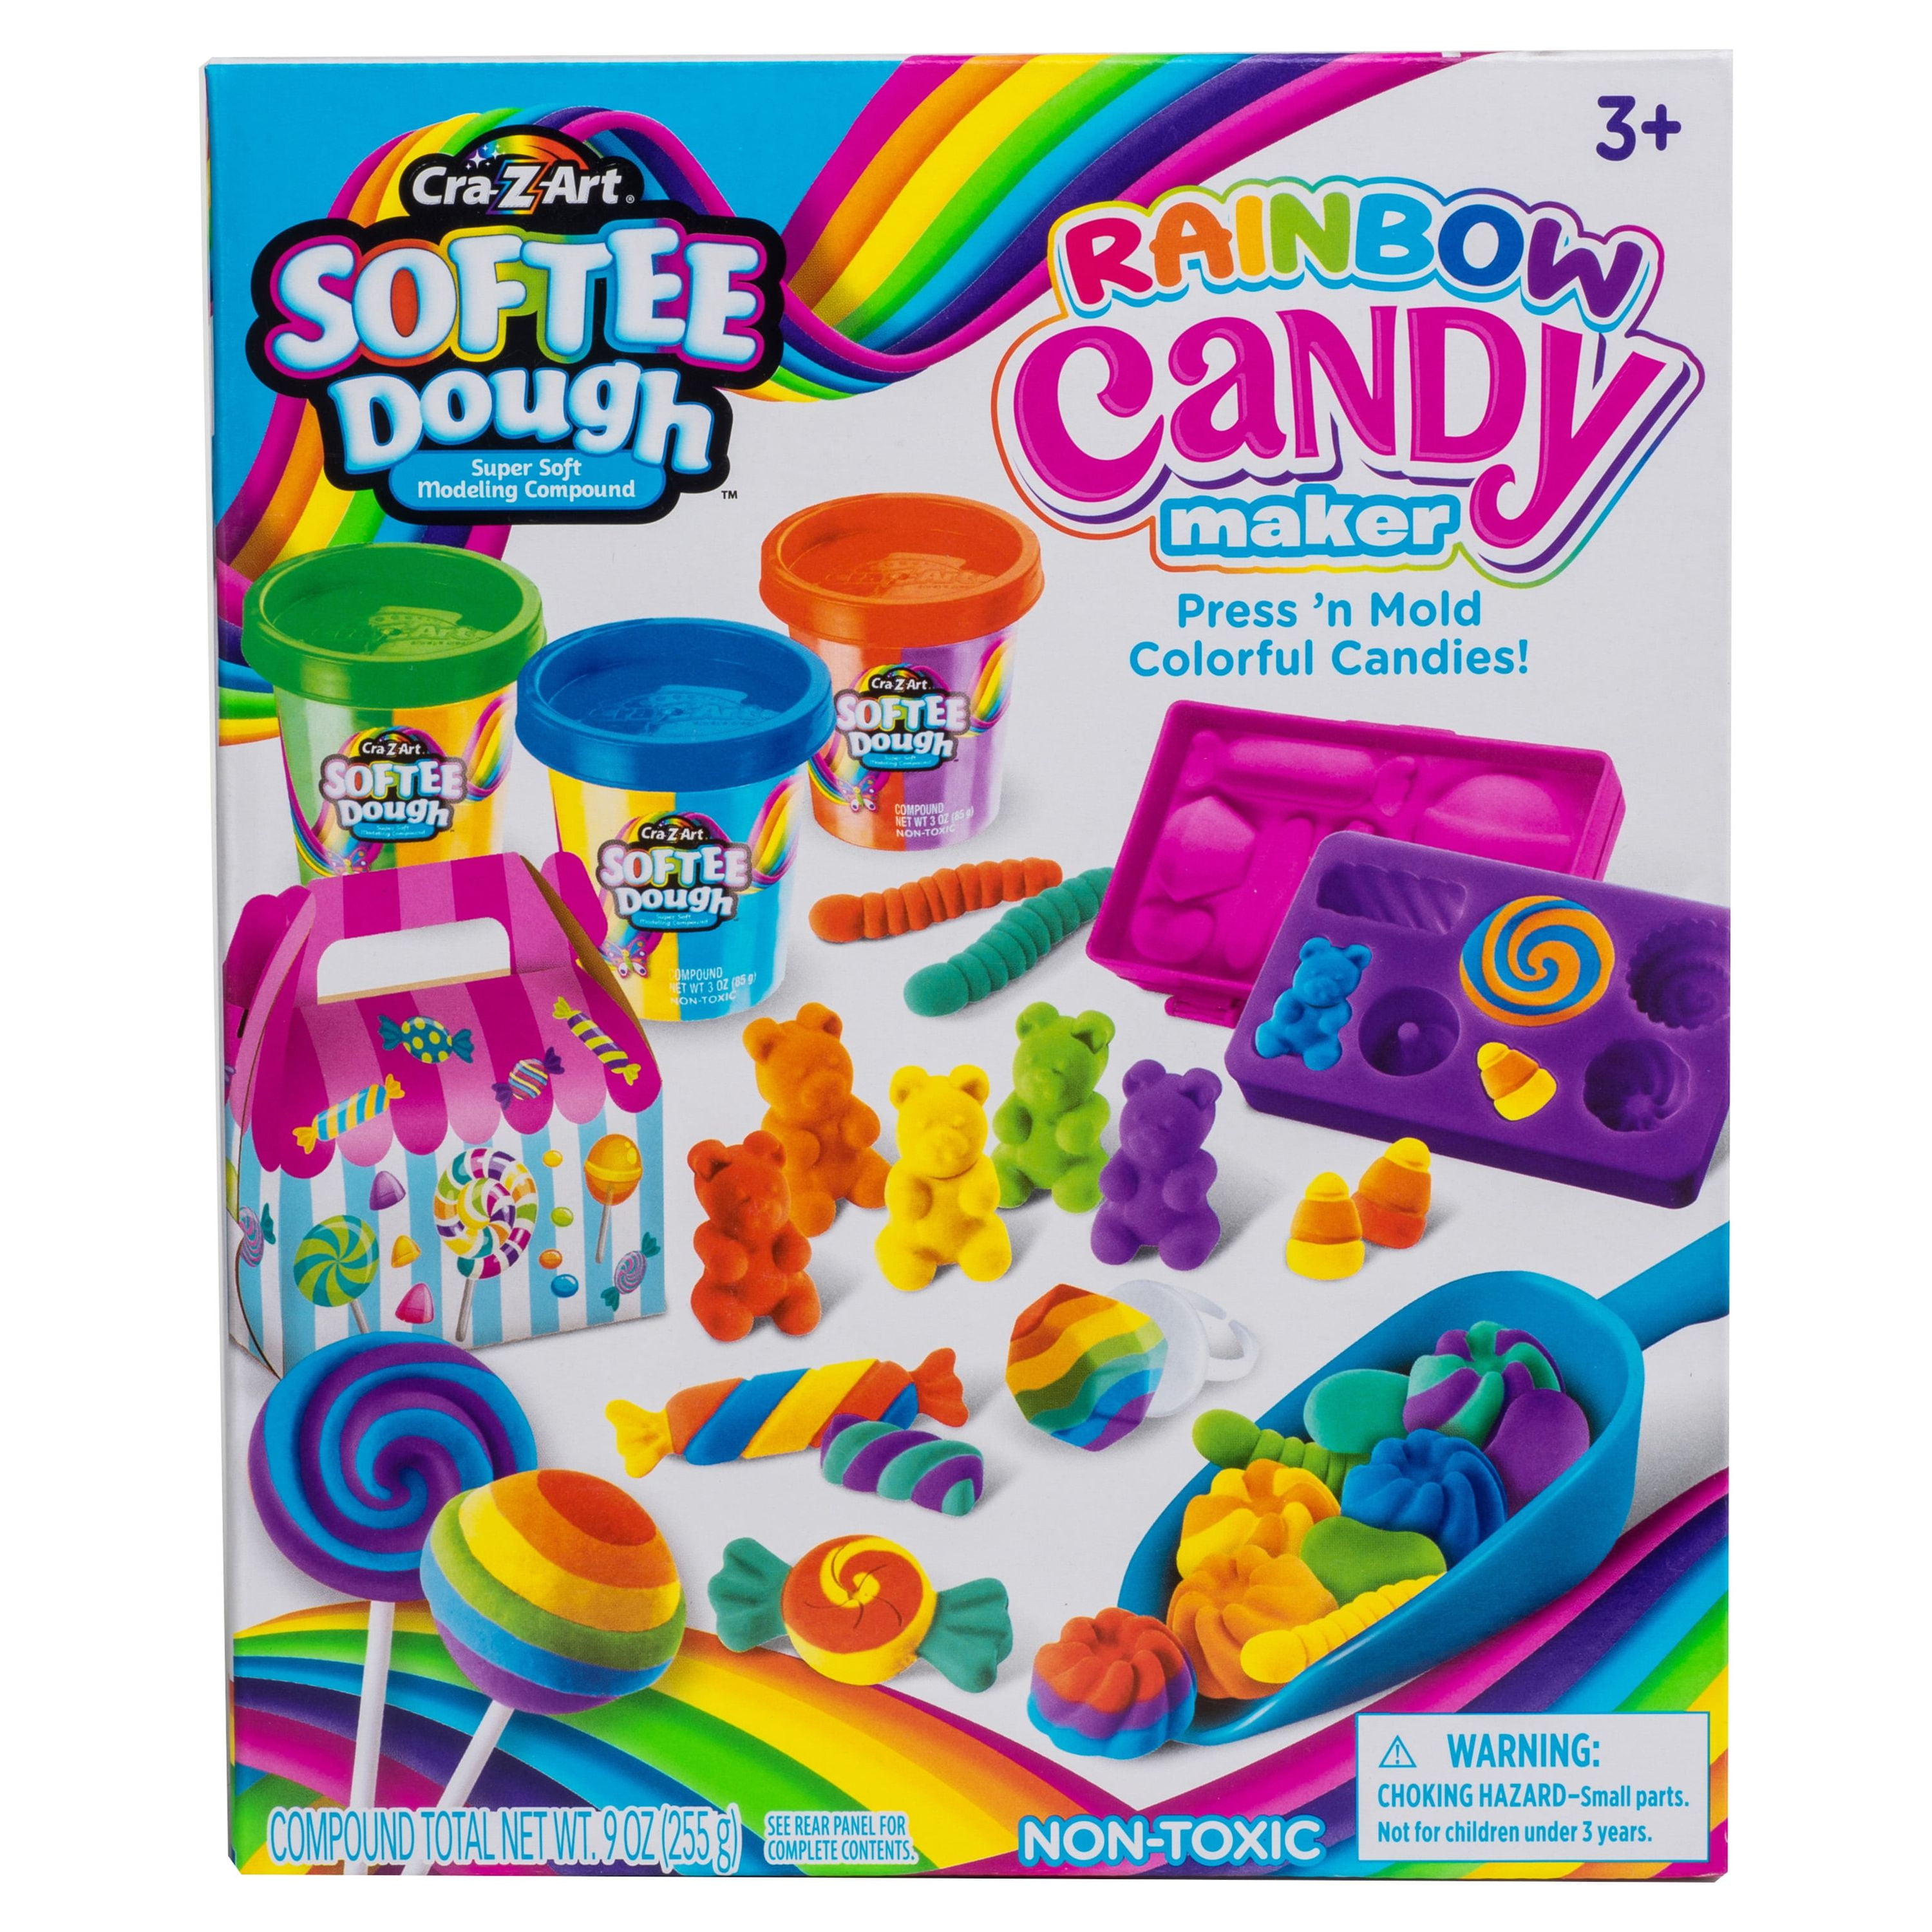 Candy Lemon - Craft Clay Toy (various designs) / Set